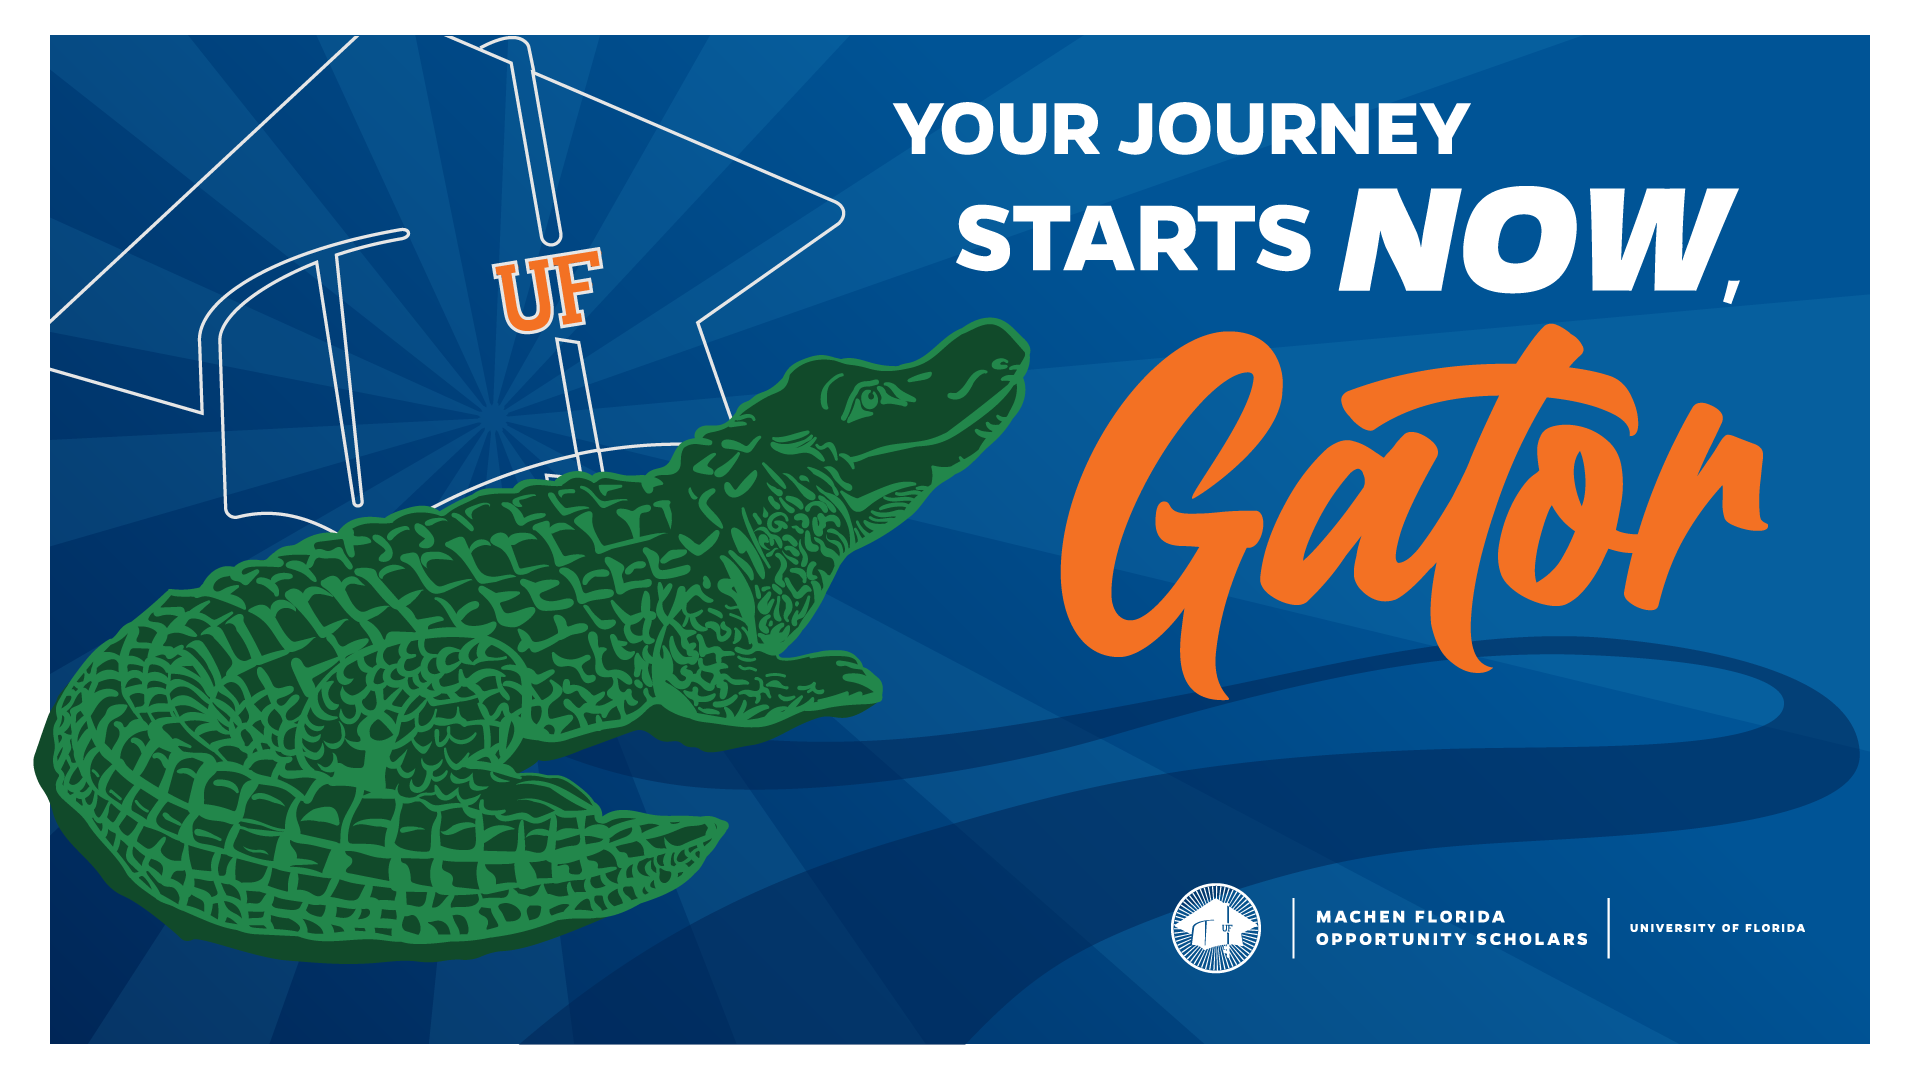 You're journey starts now, Gator